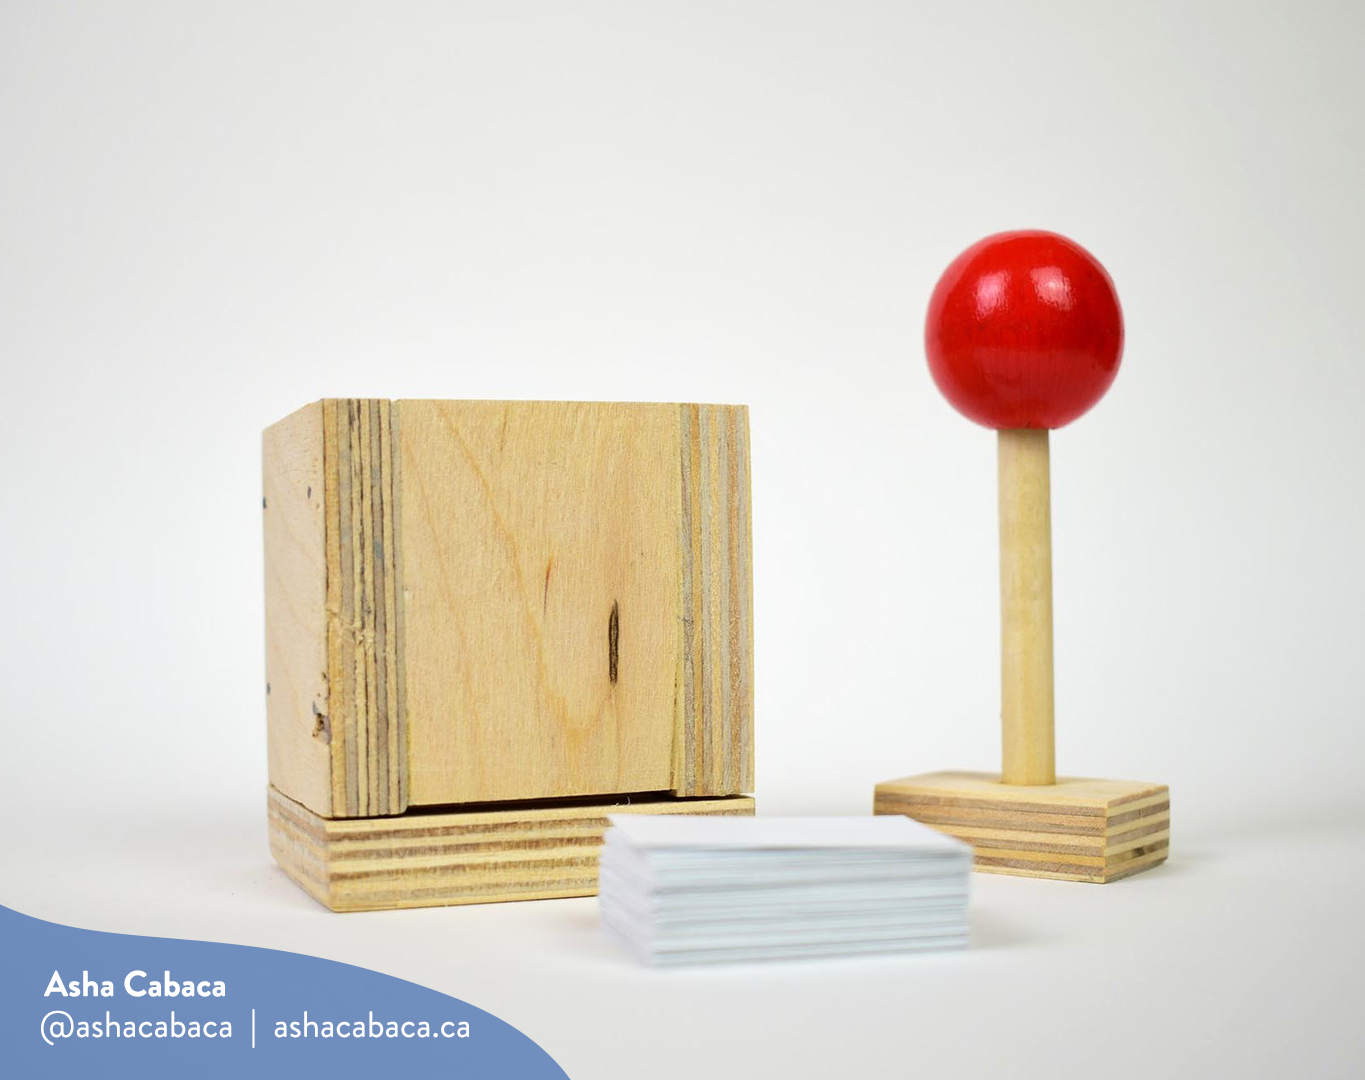 Horizontal photo of artwork by Asha Cabaca, it features a wooden box & a stick with a red handle used to shape mud into a brick, it lays on a white surface with a stack of paper. There is a watermark in blue that has Asha’s name, Instagram handle (@ashacabaca) and website (ashacabaca.ca).